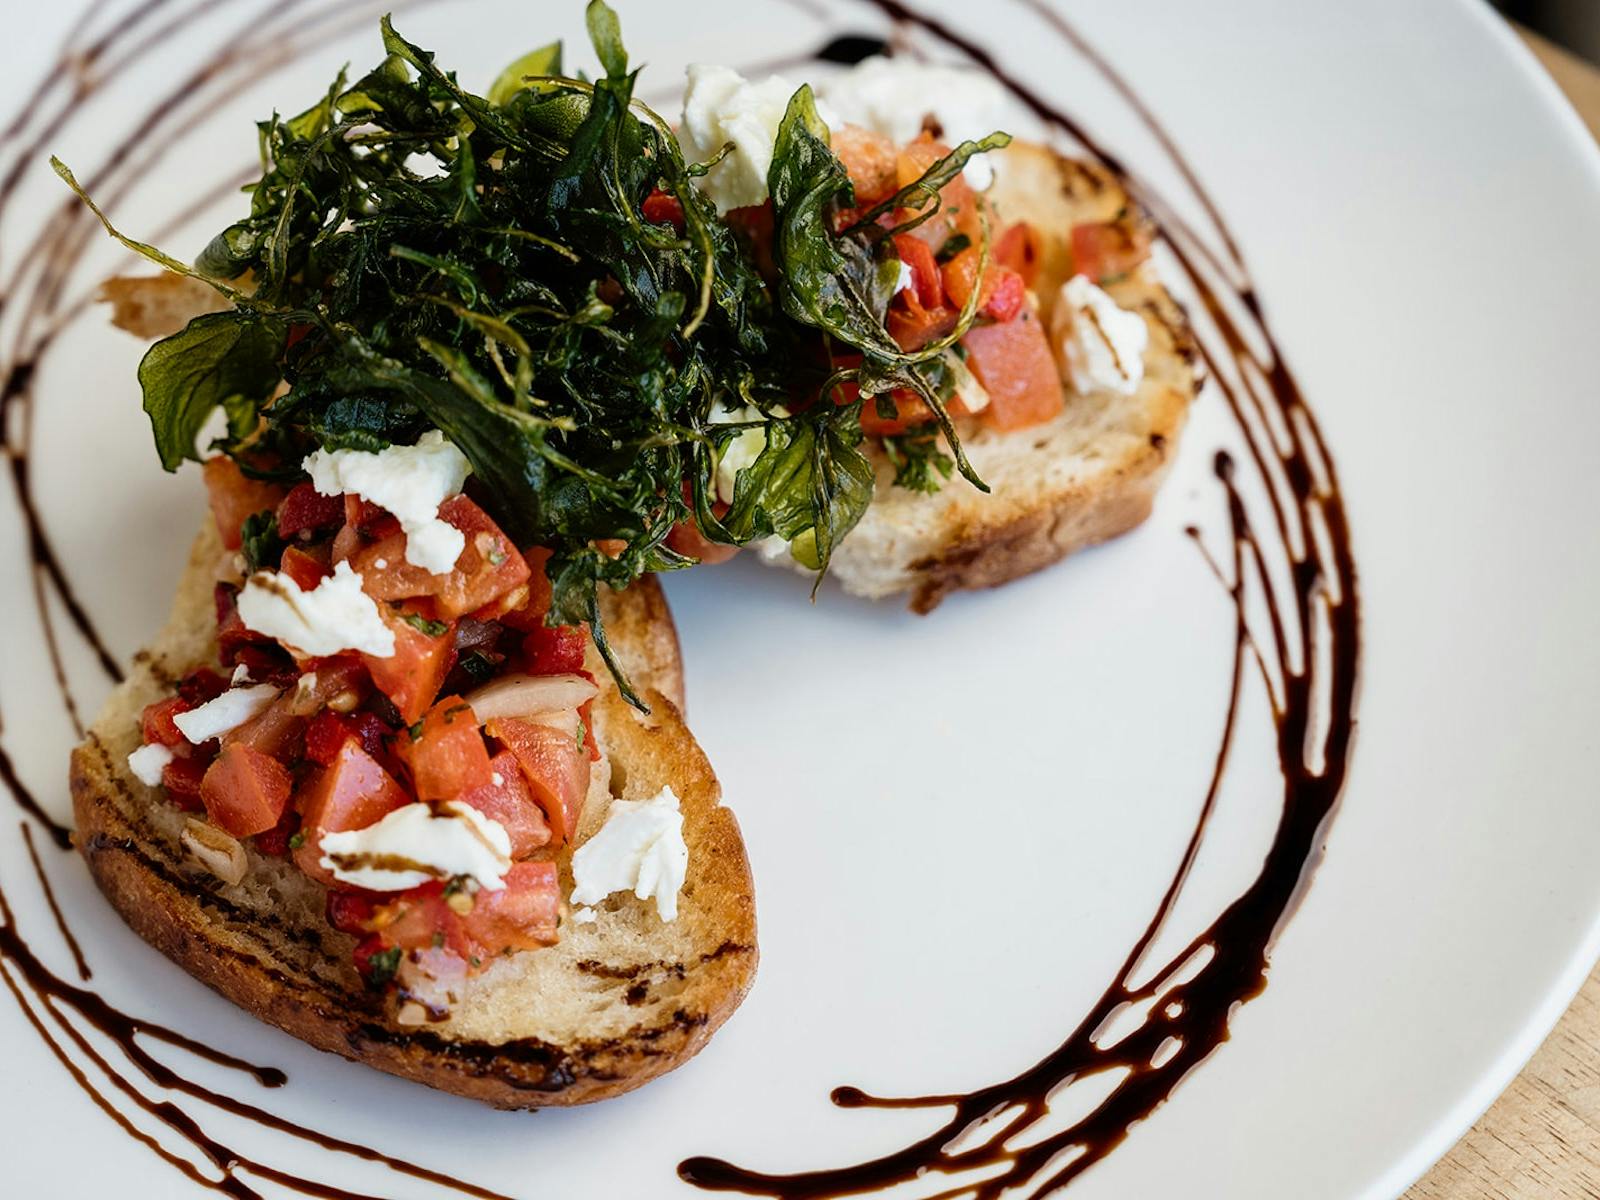 Two slices of Bruschetta, served on a plate with a swirl of Balsamic Glaze.